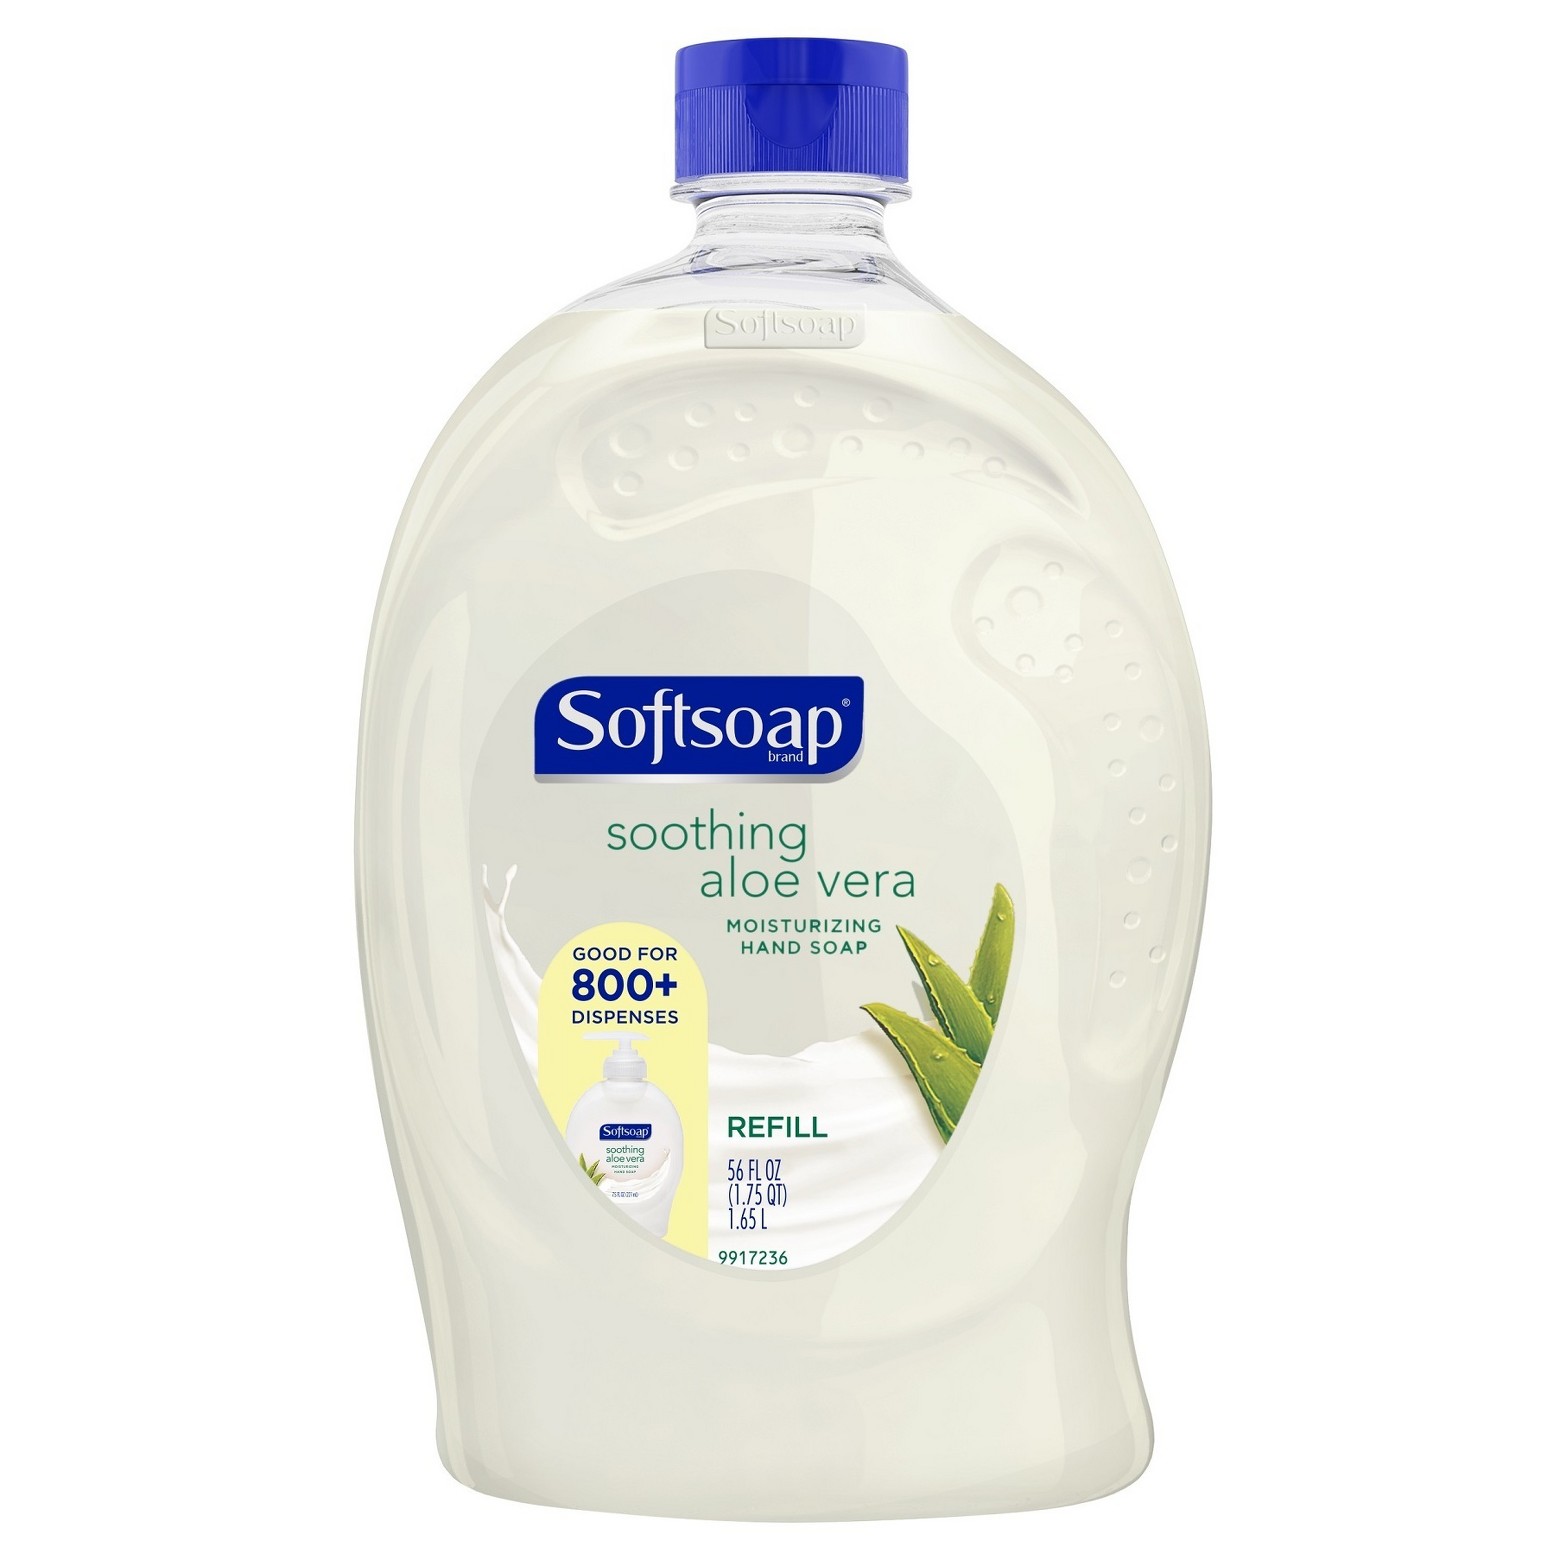 56oz Softsoap liquid hand soap refill for $4 + $5 Target gift card with purchase of 3